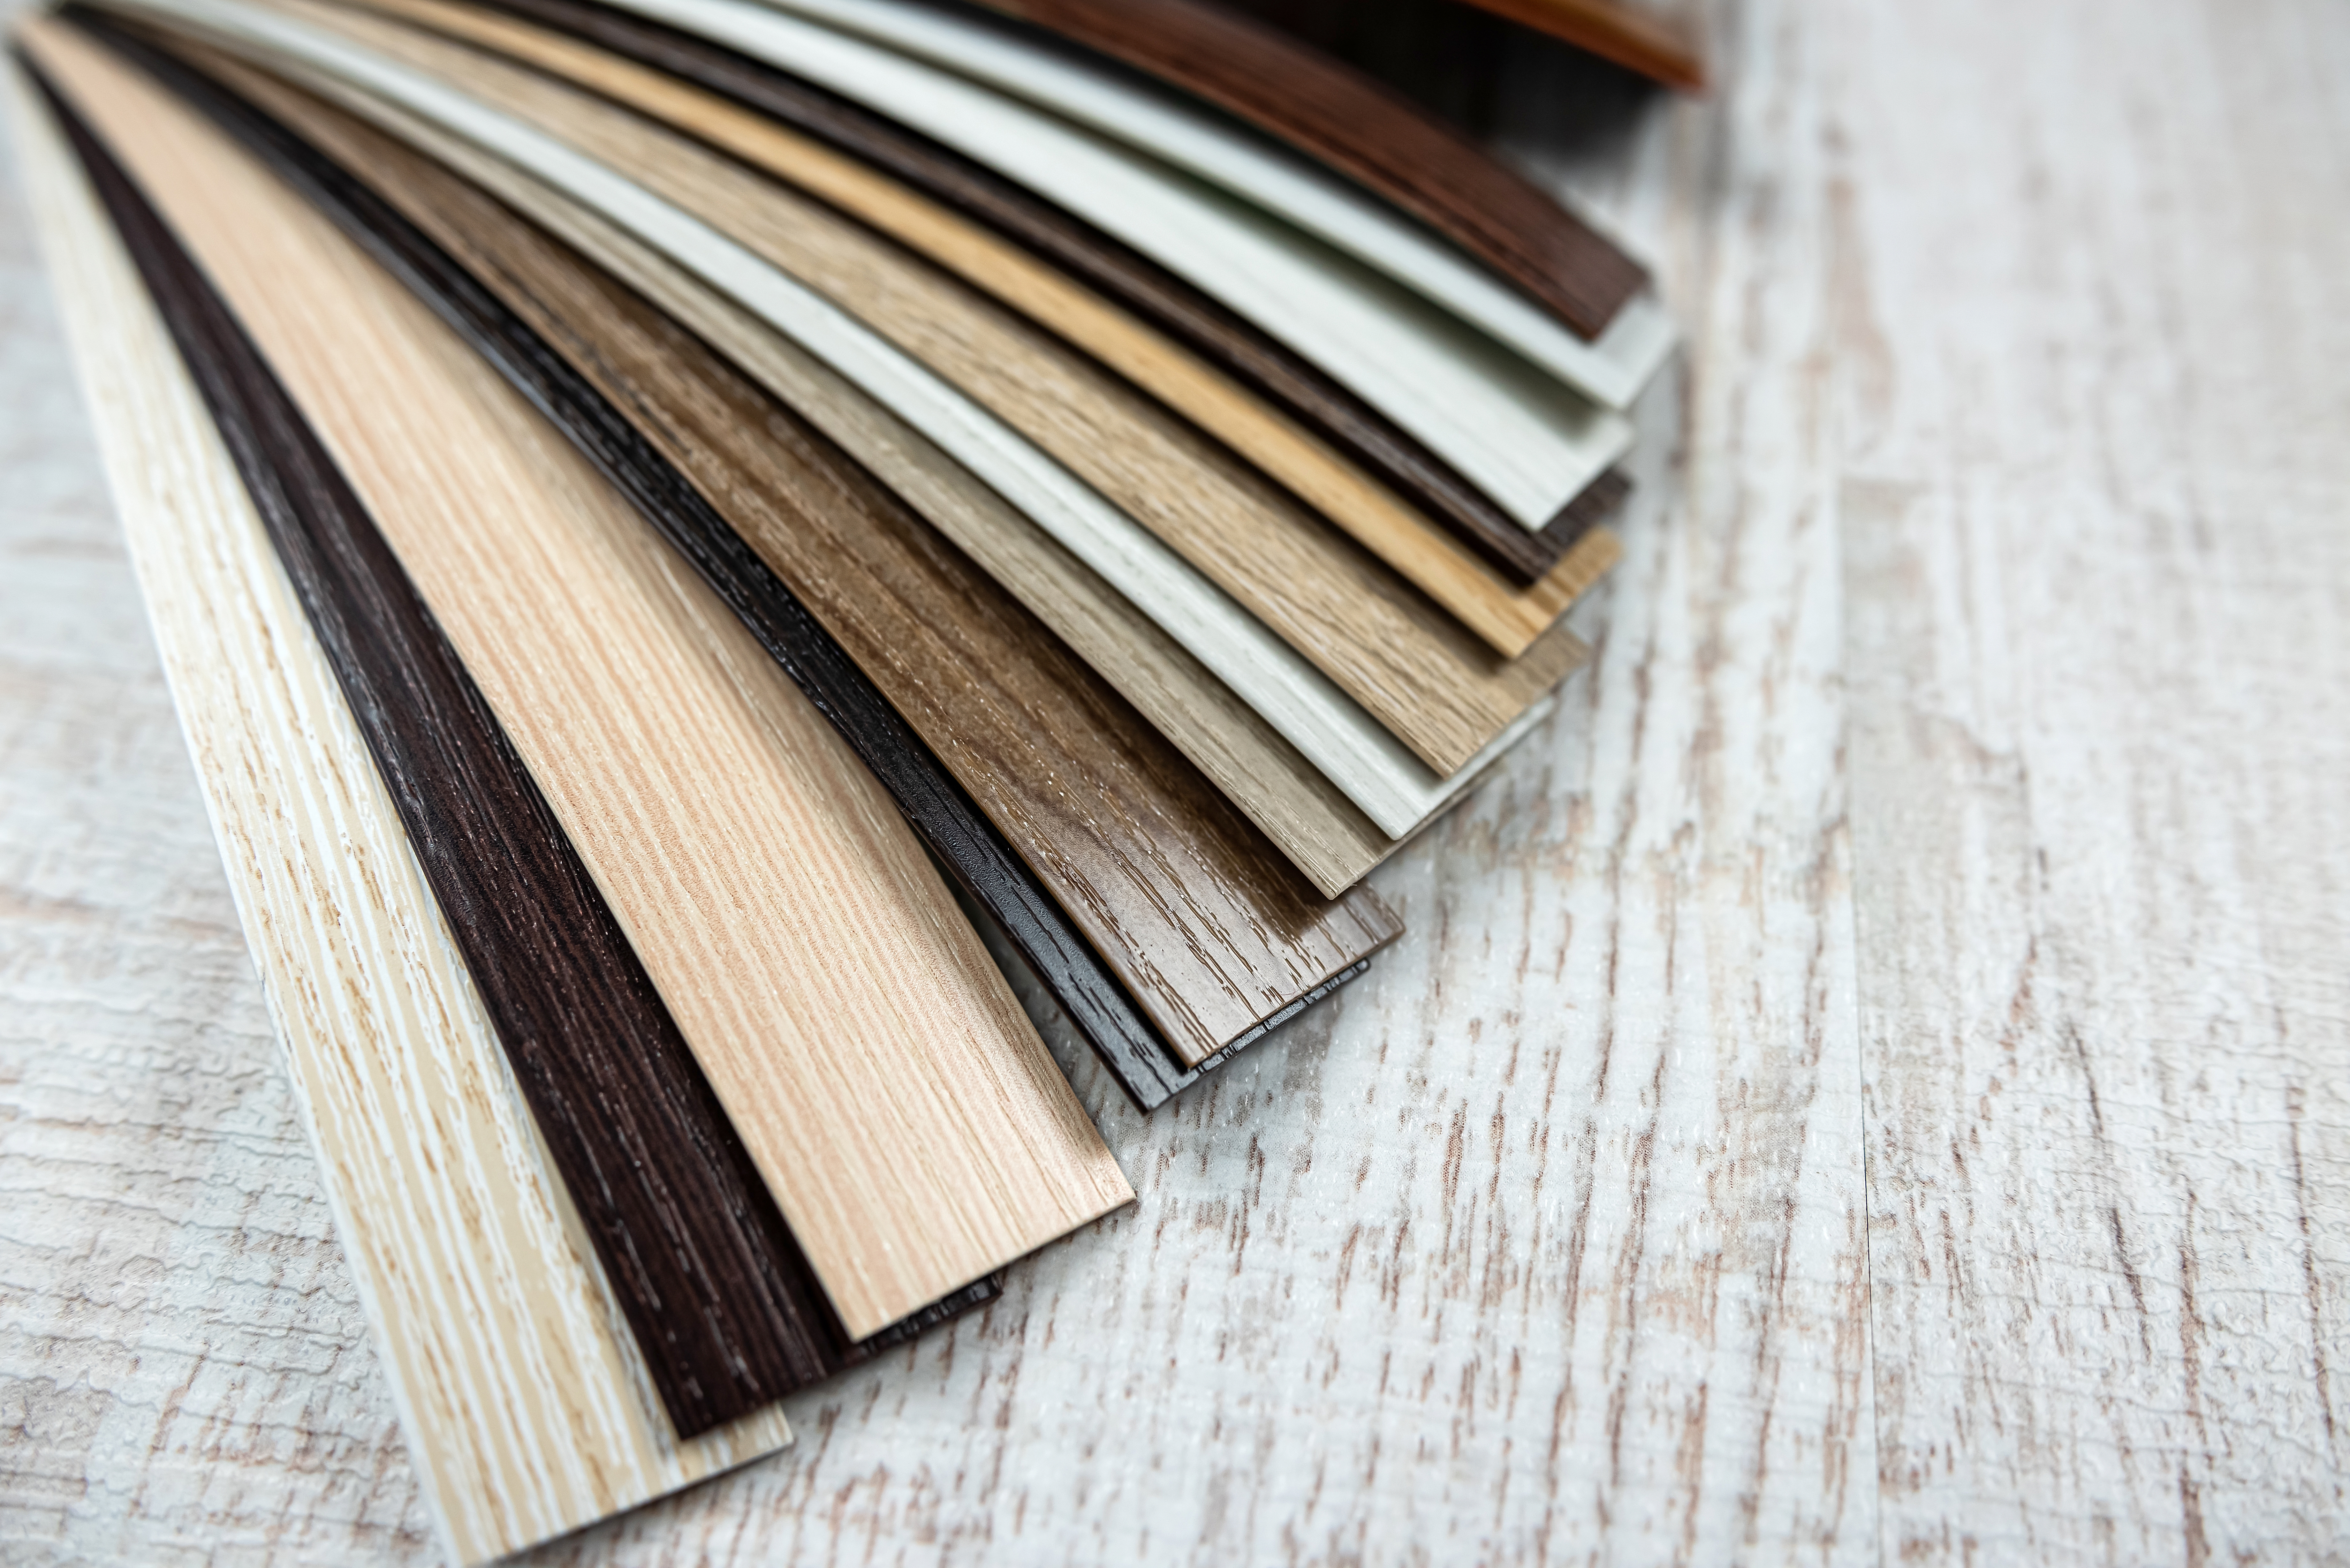 How to protect laminate furniture